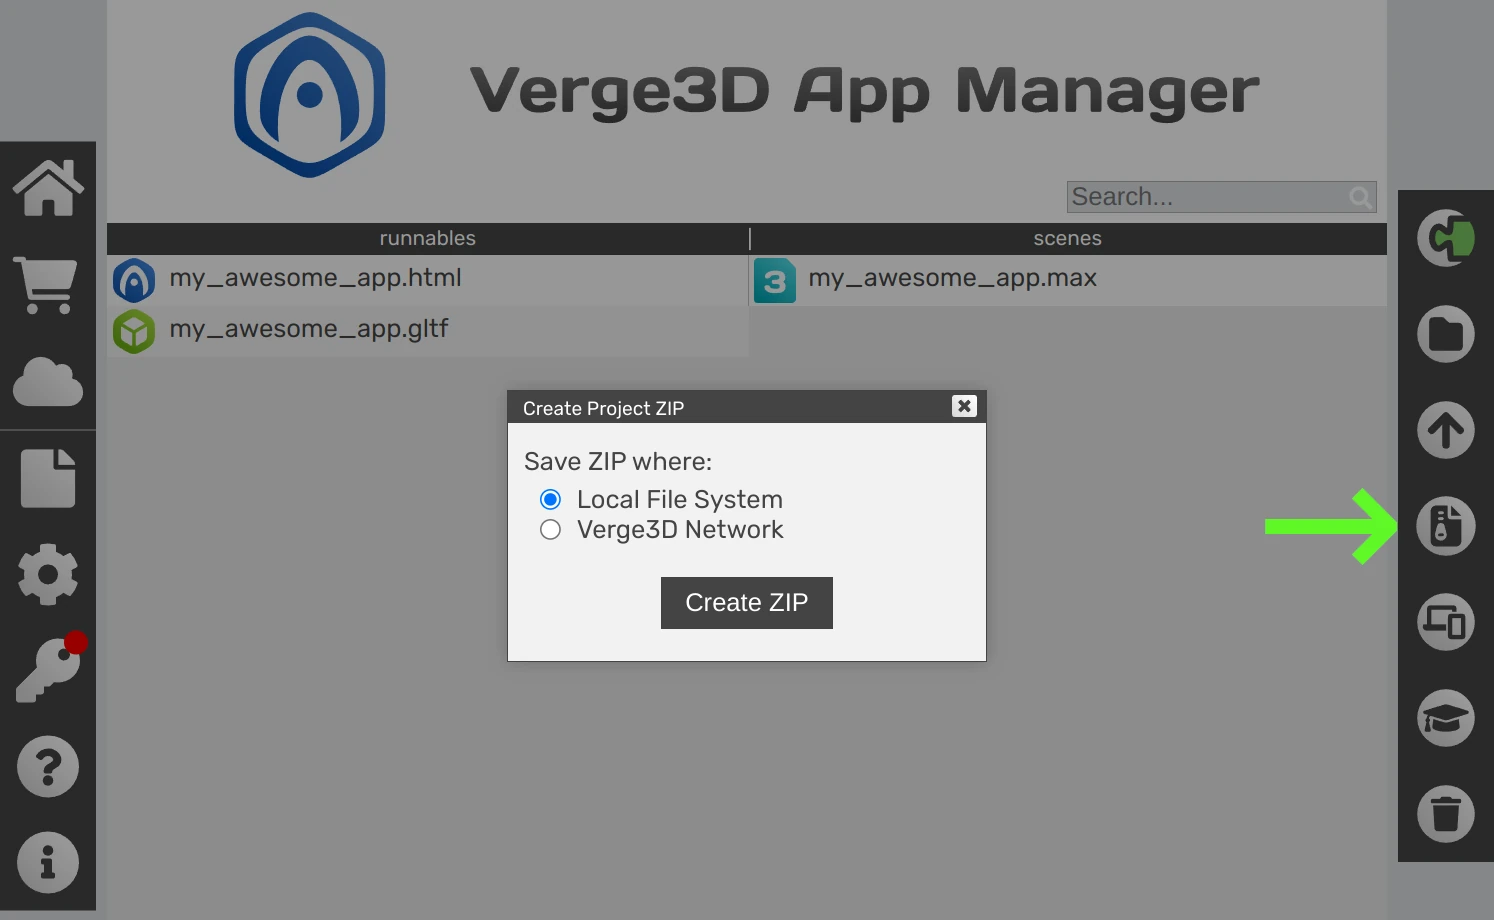 Verge3D-3ds Max: App Manager - save project zip